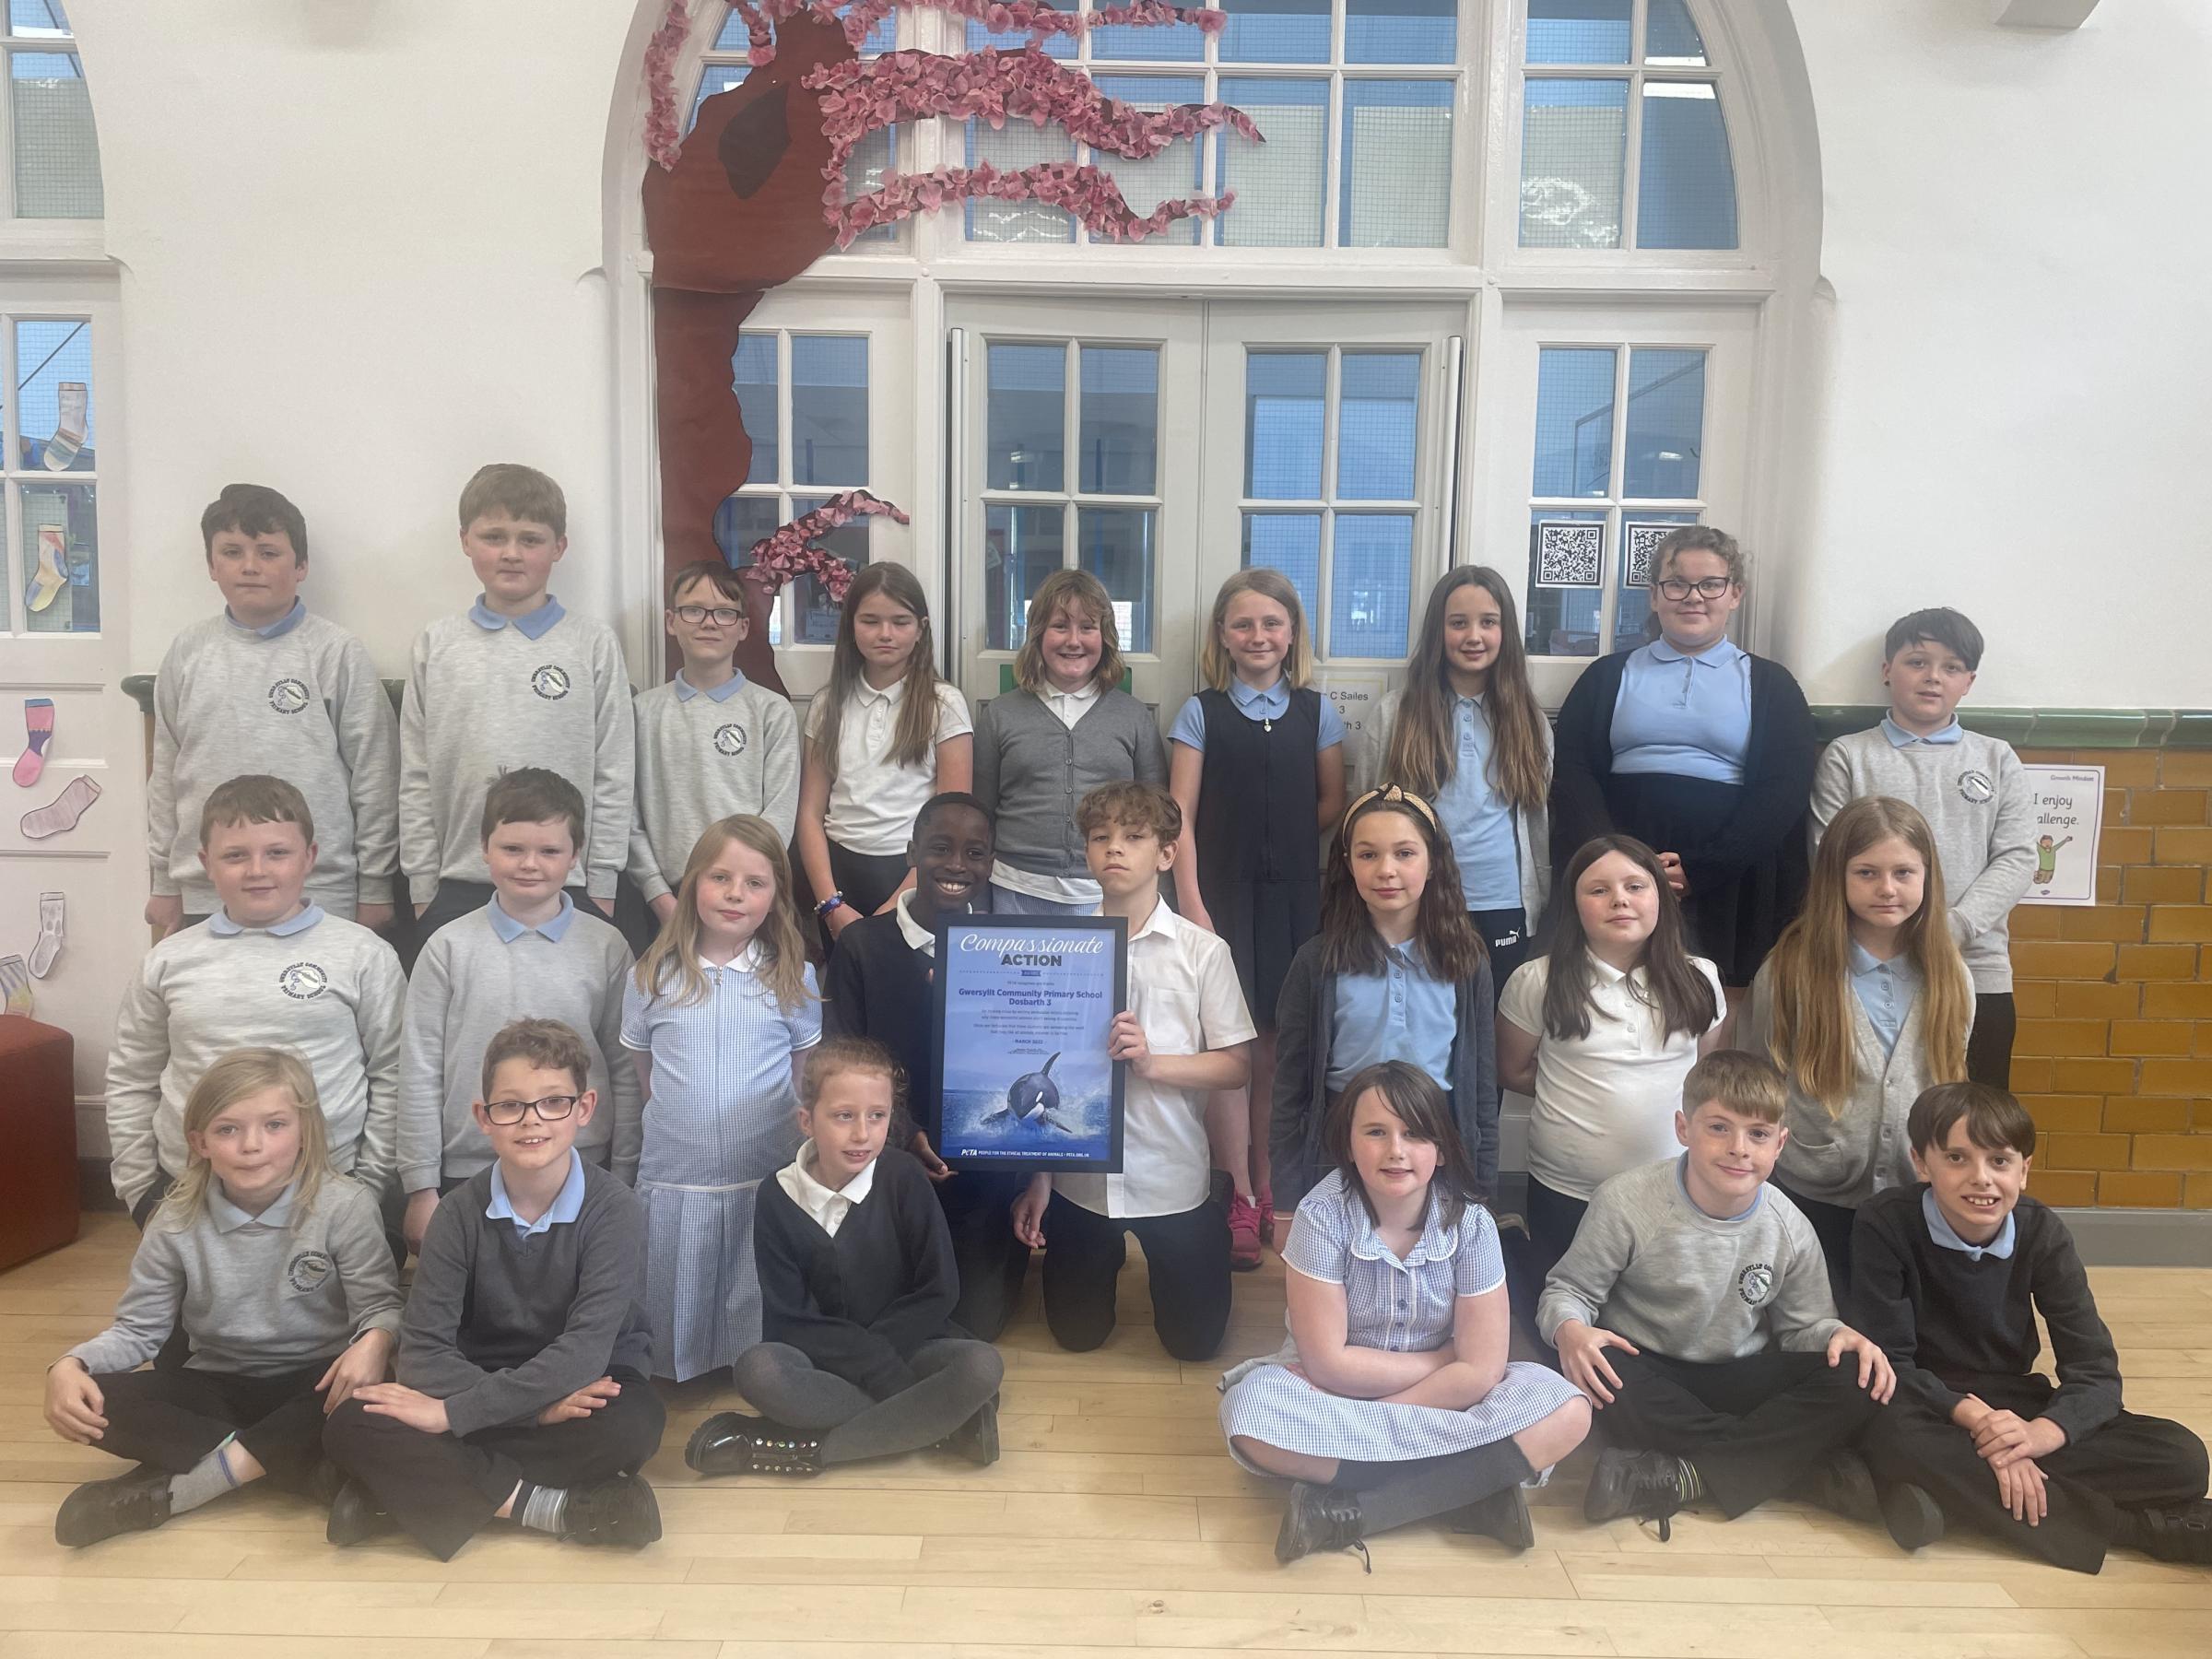 Pupils at Gwersyllt CP School with their Compassionate Action Award from PETA.